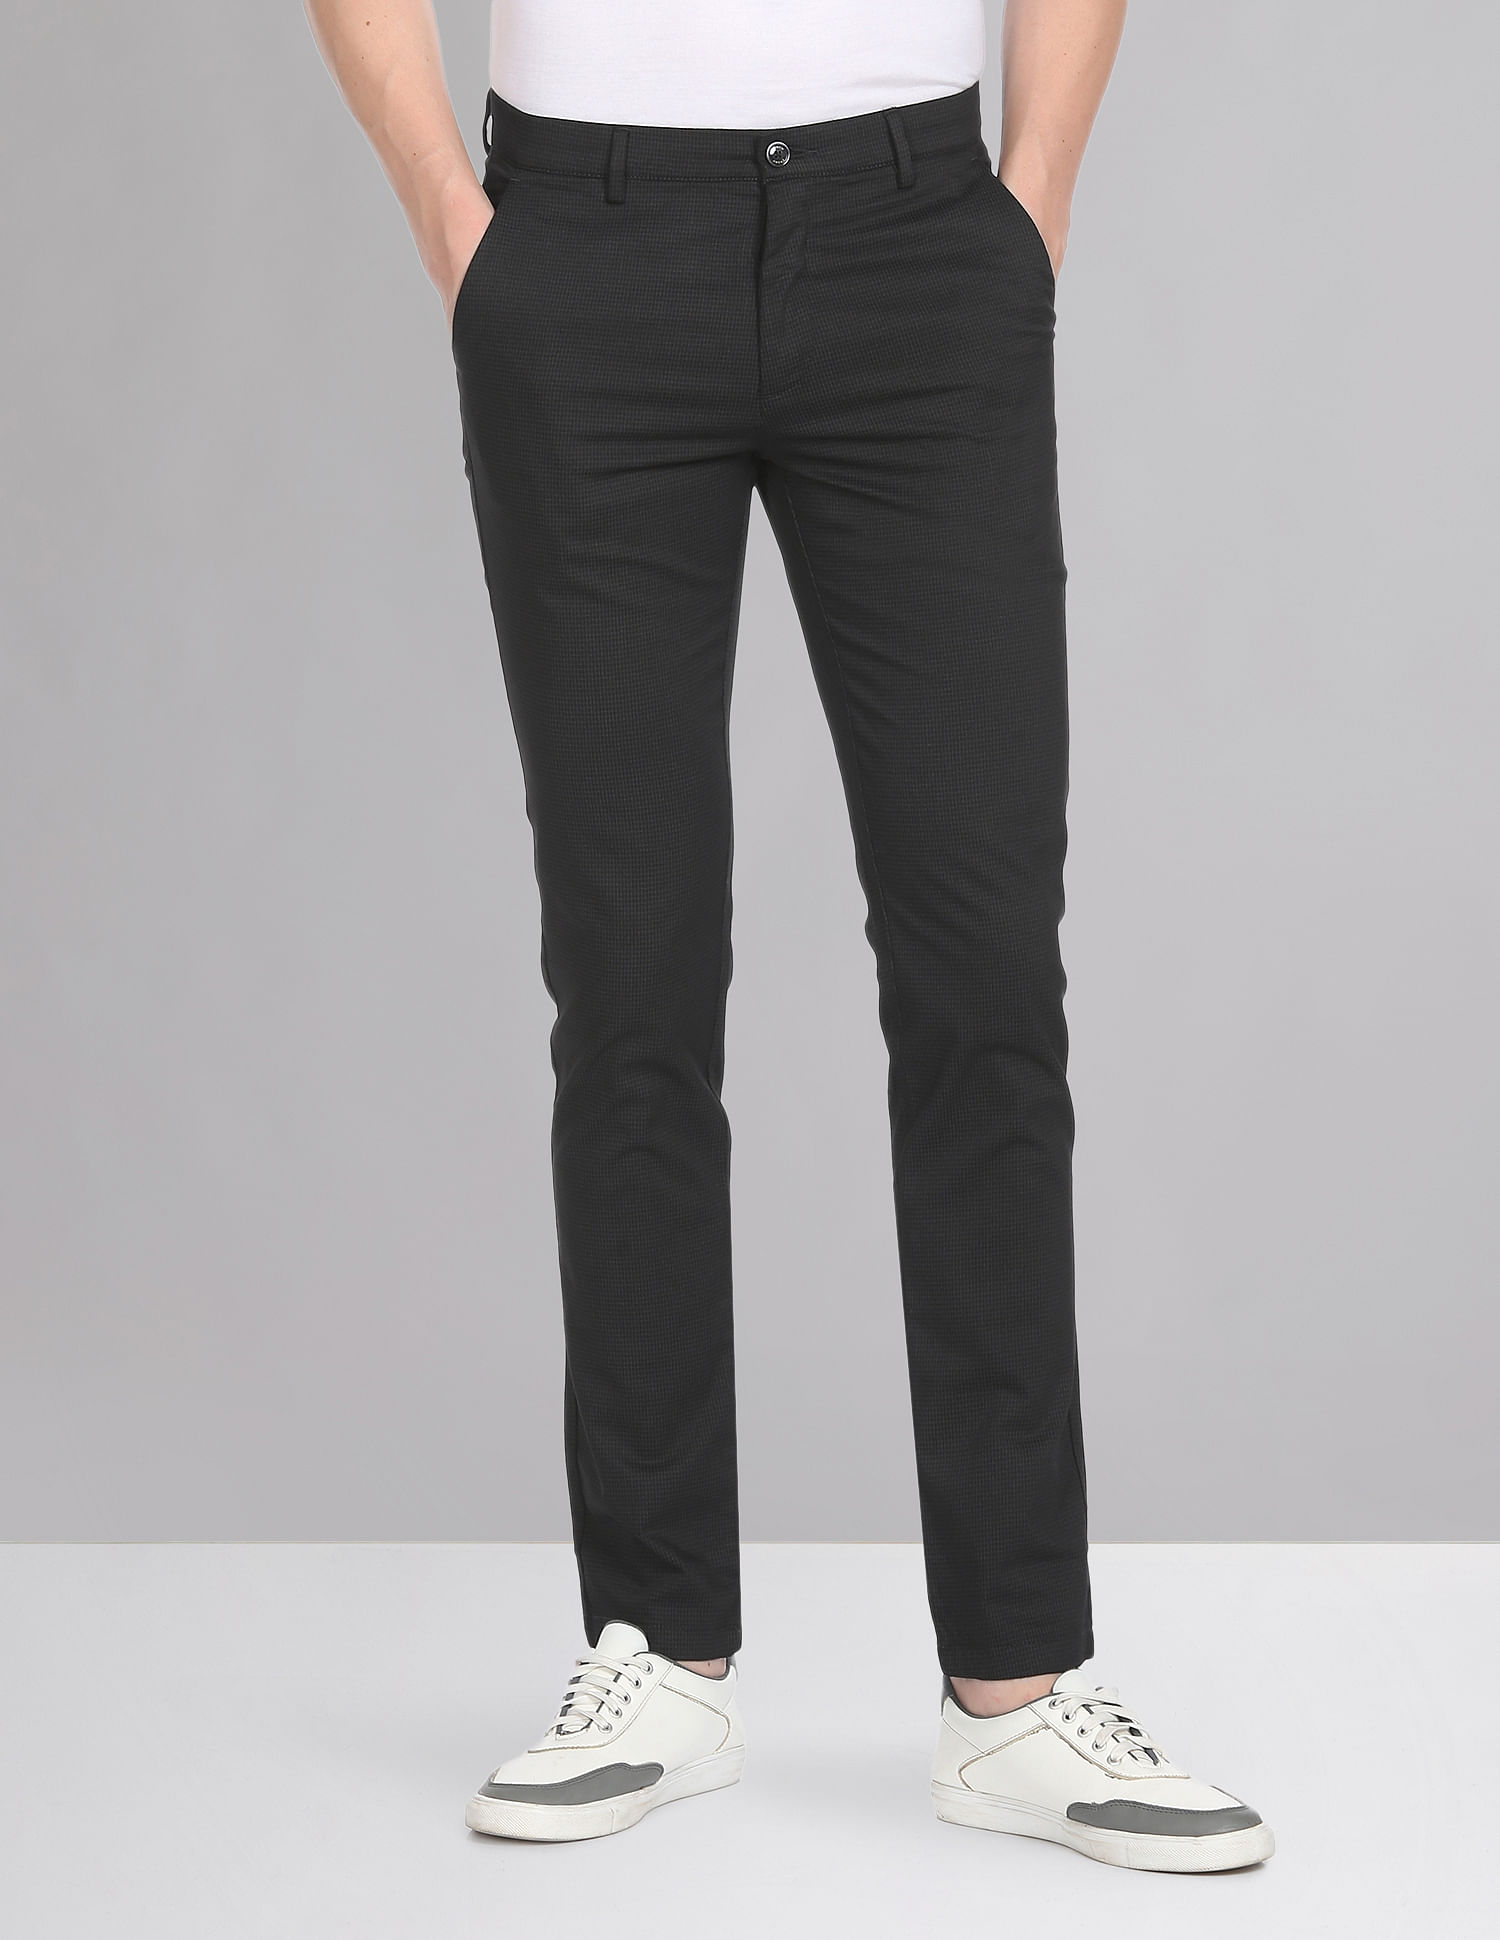 Radhikawold Regular Fit Women Black Trousers - Buy Radhikawold Regular Fit  Women Black Trousers Online at Best Prices in India | Flipkart.com